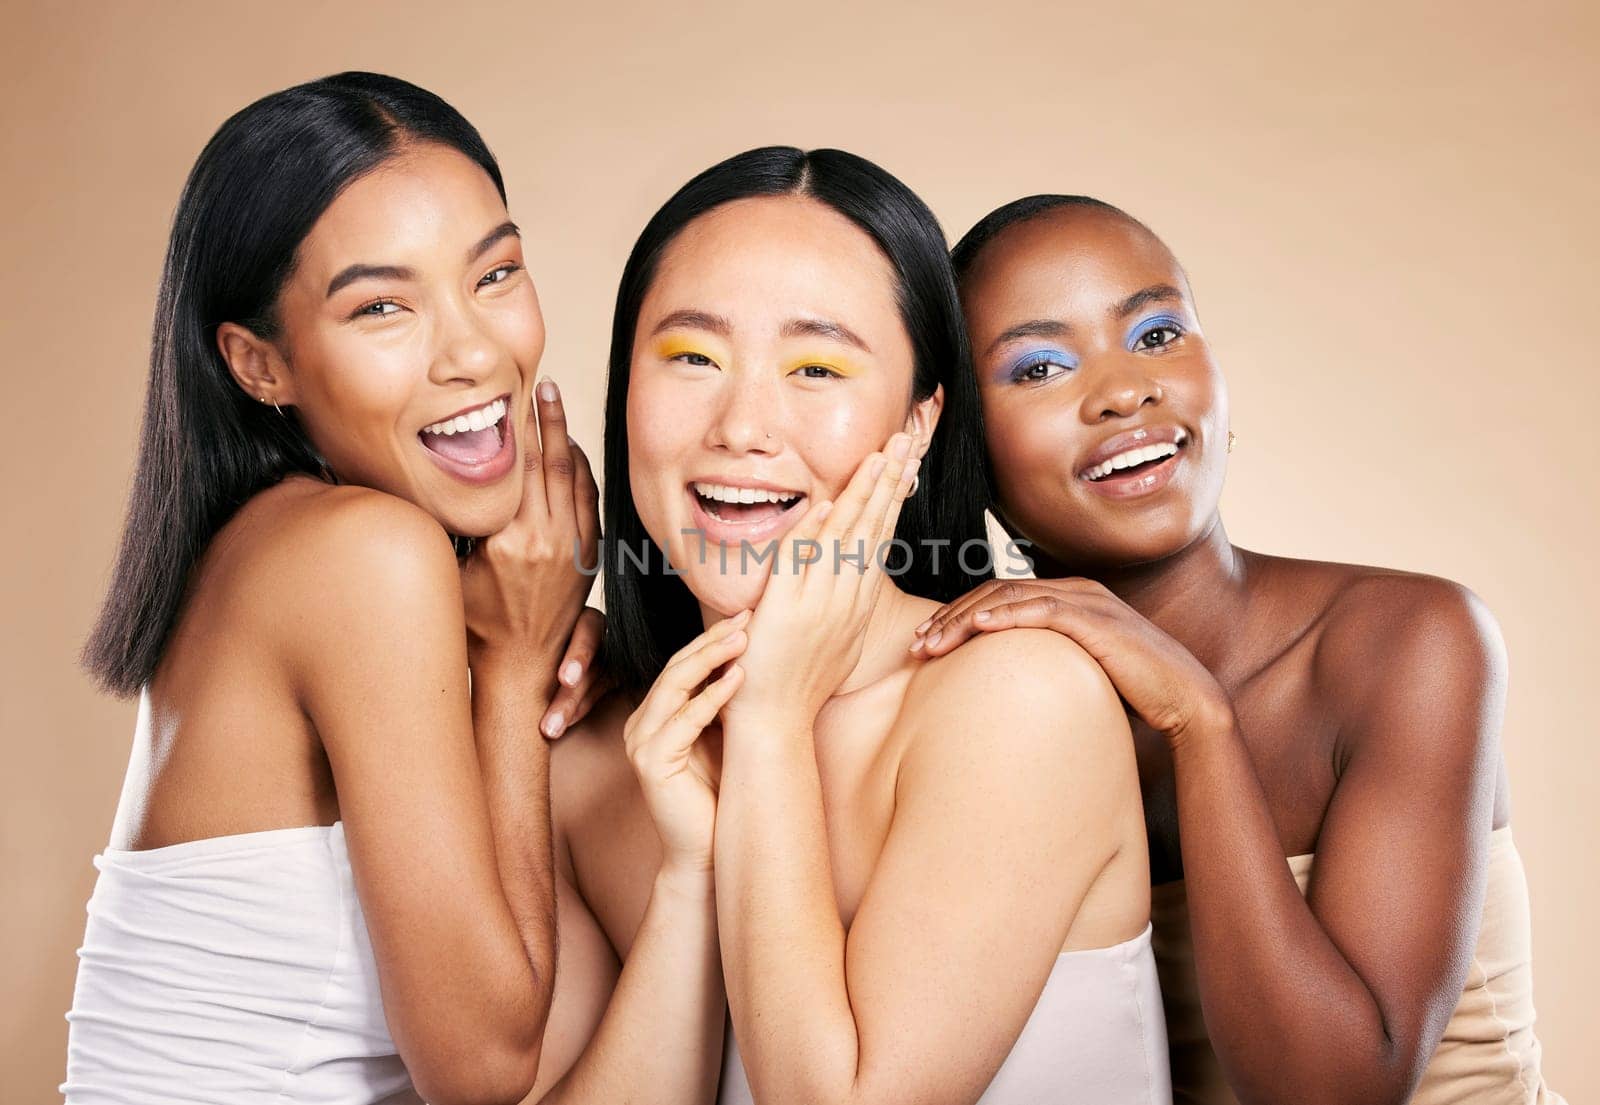 Happy women, portrait smile and diverse beauty for skincare, cosmetics or makeup against a studio background. Female friends or model face smiling in happiness for fun healthy skin treatment by YuriArcurs